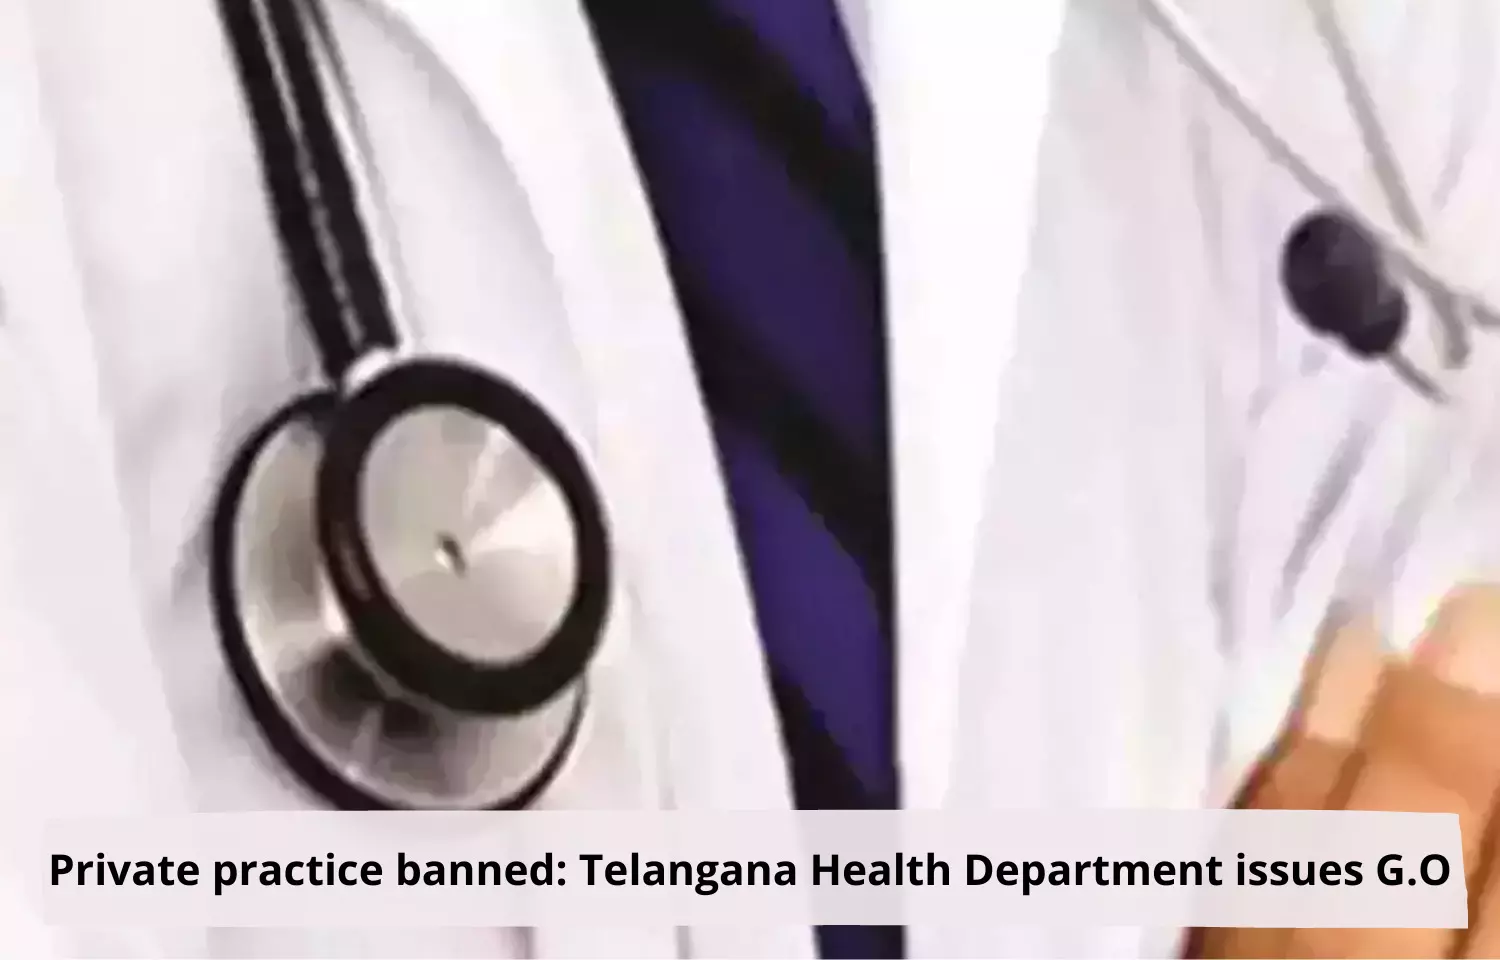 Its official: Total ban on private practice in Telangana